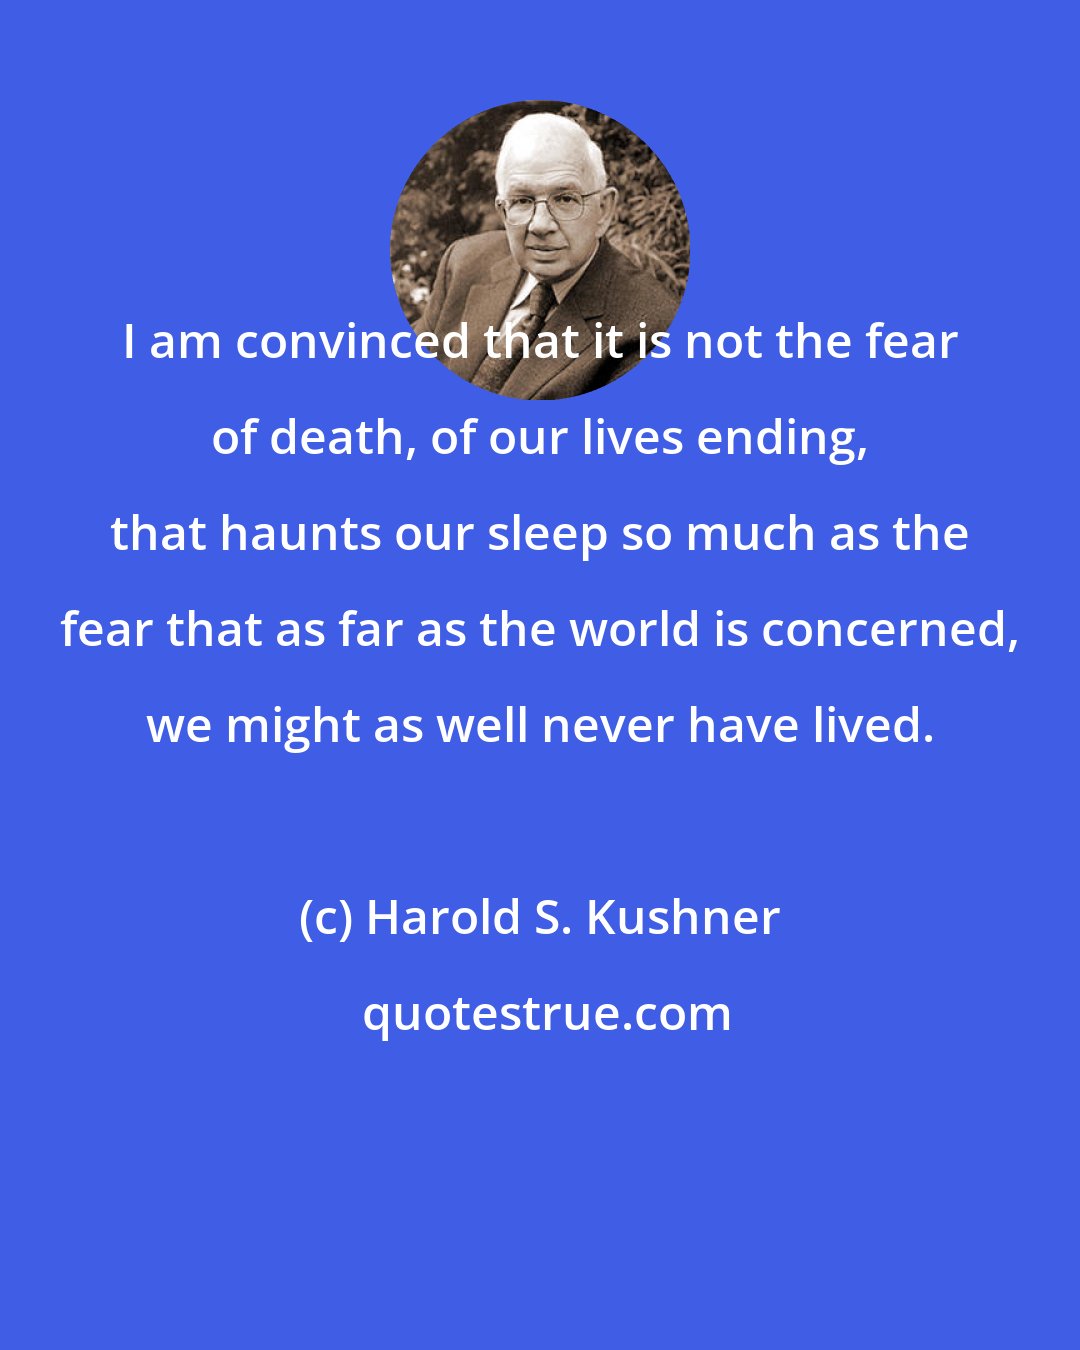 Harold S. Kushner: I am convinced that it is not the fear of death, of our lives ending, that haunts our sleep so much as the fear that as far as the world is concerned, we might as well never have lived.